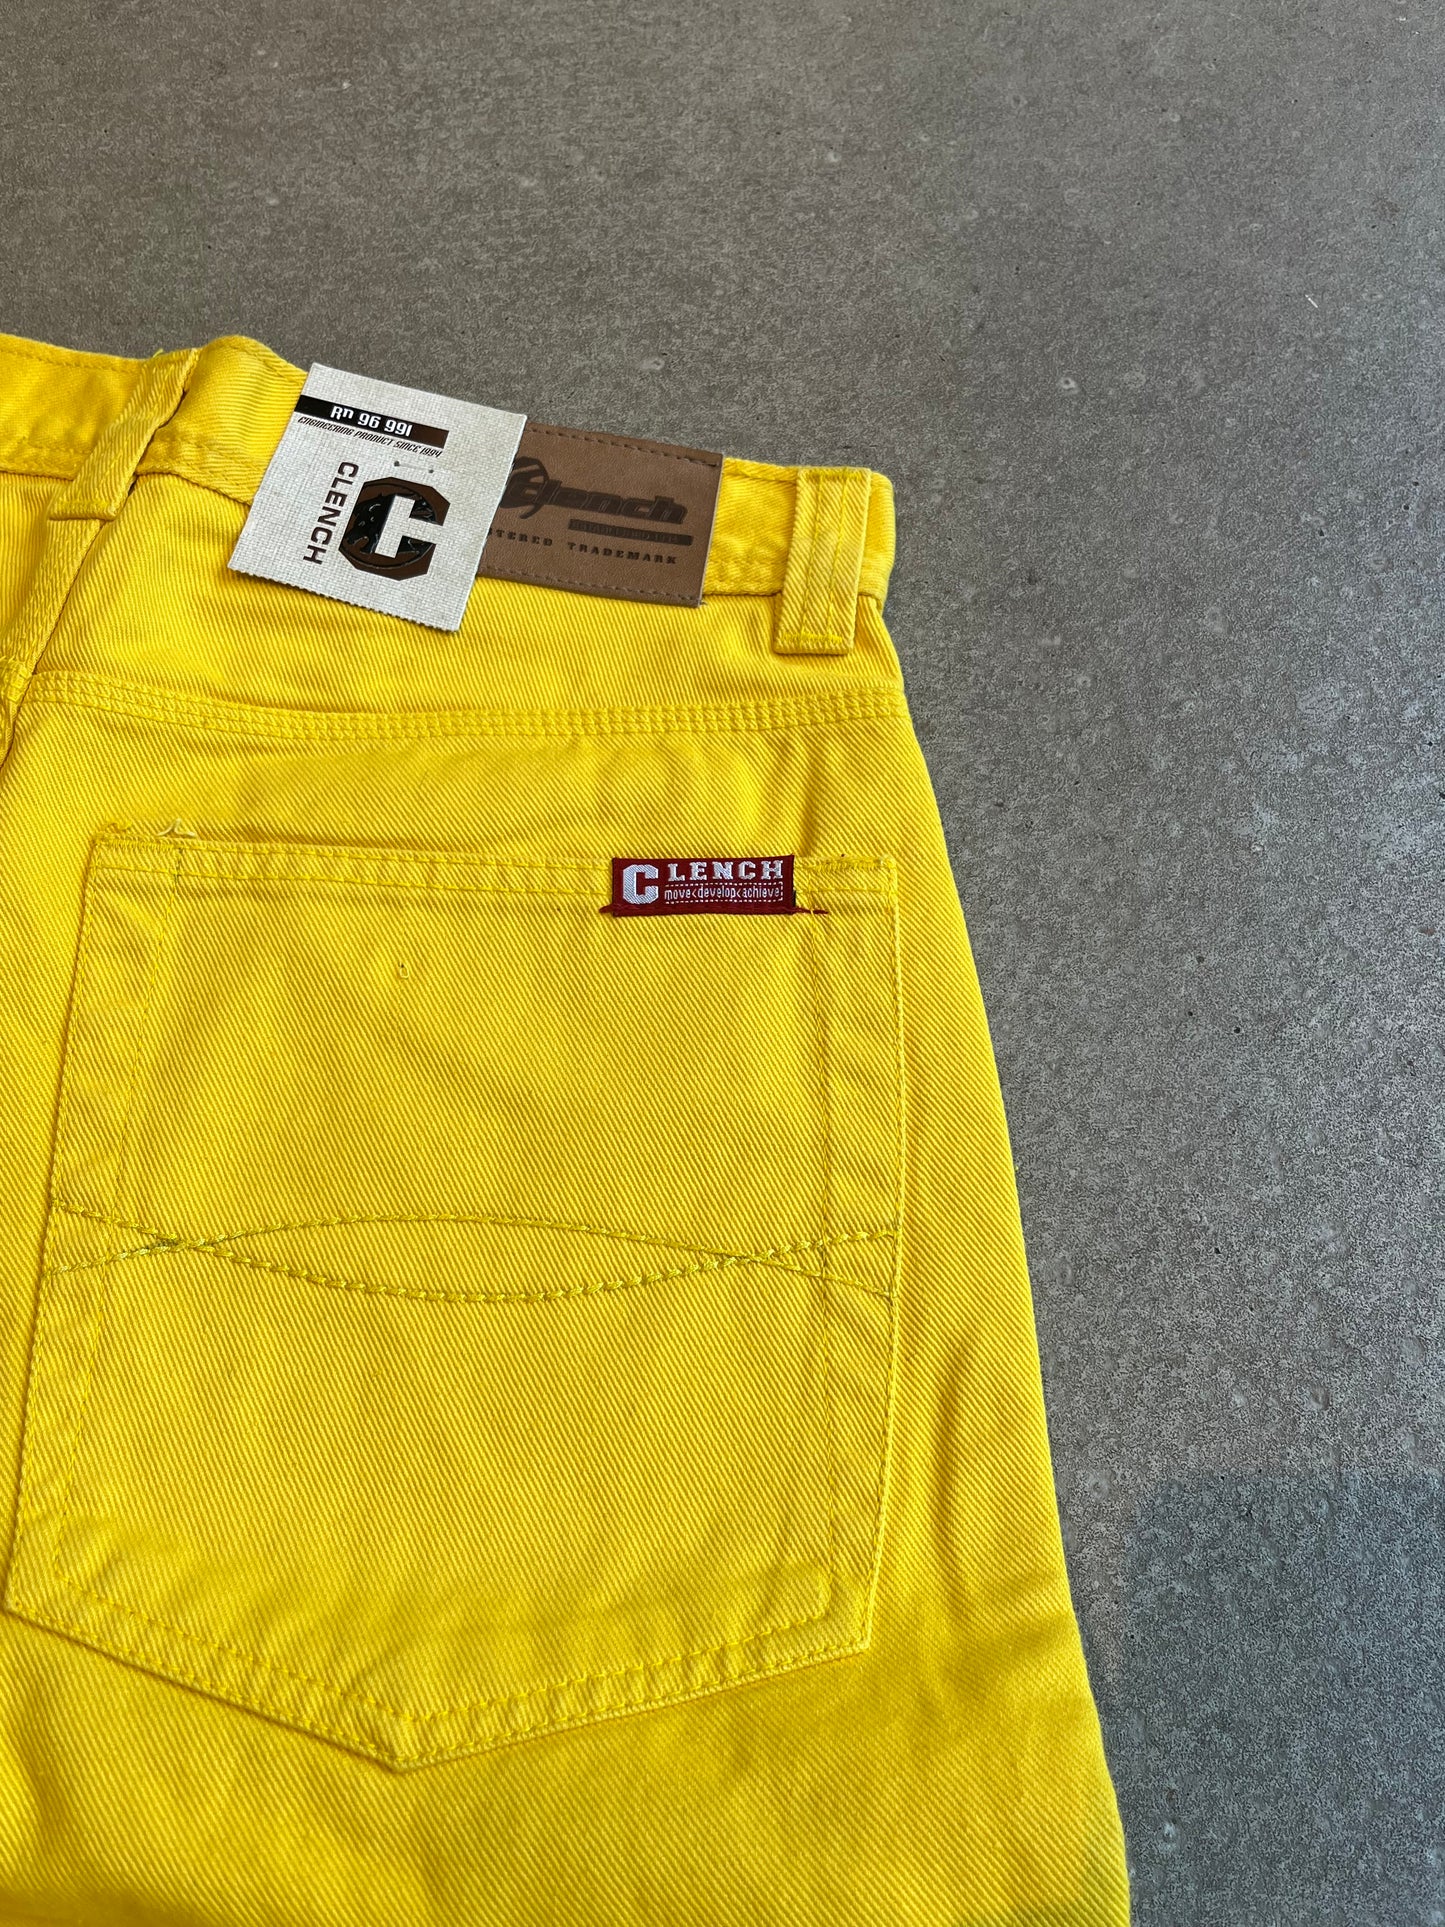 Clench Yellow Shorts